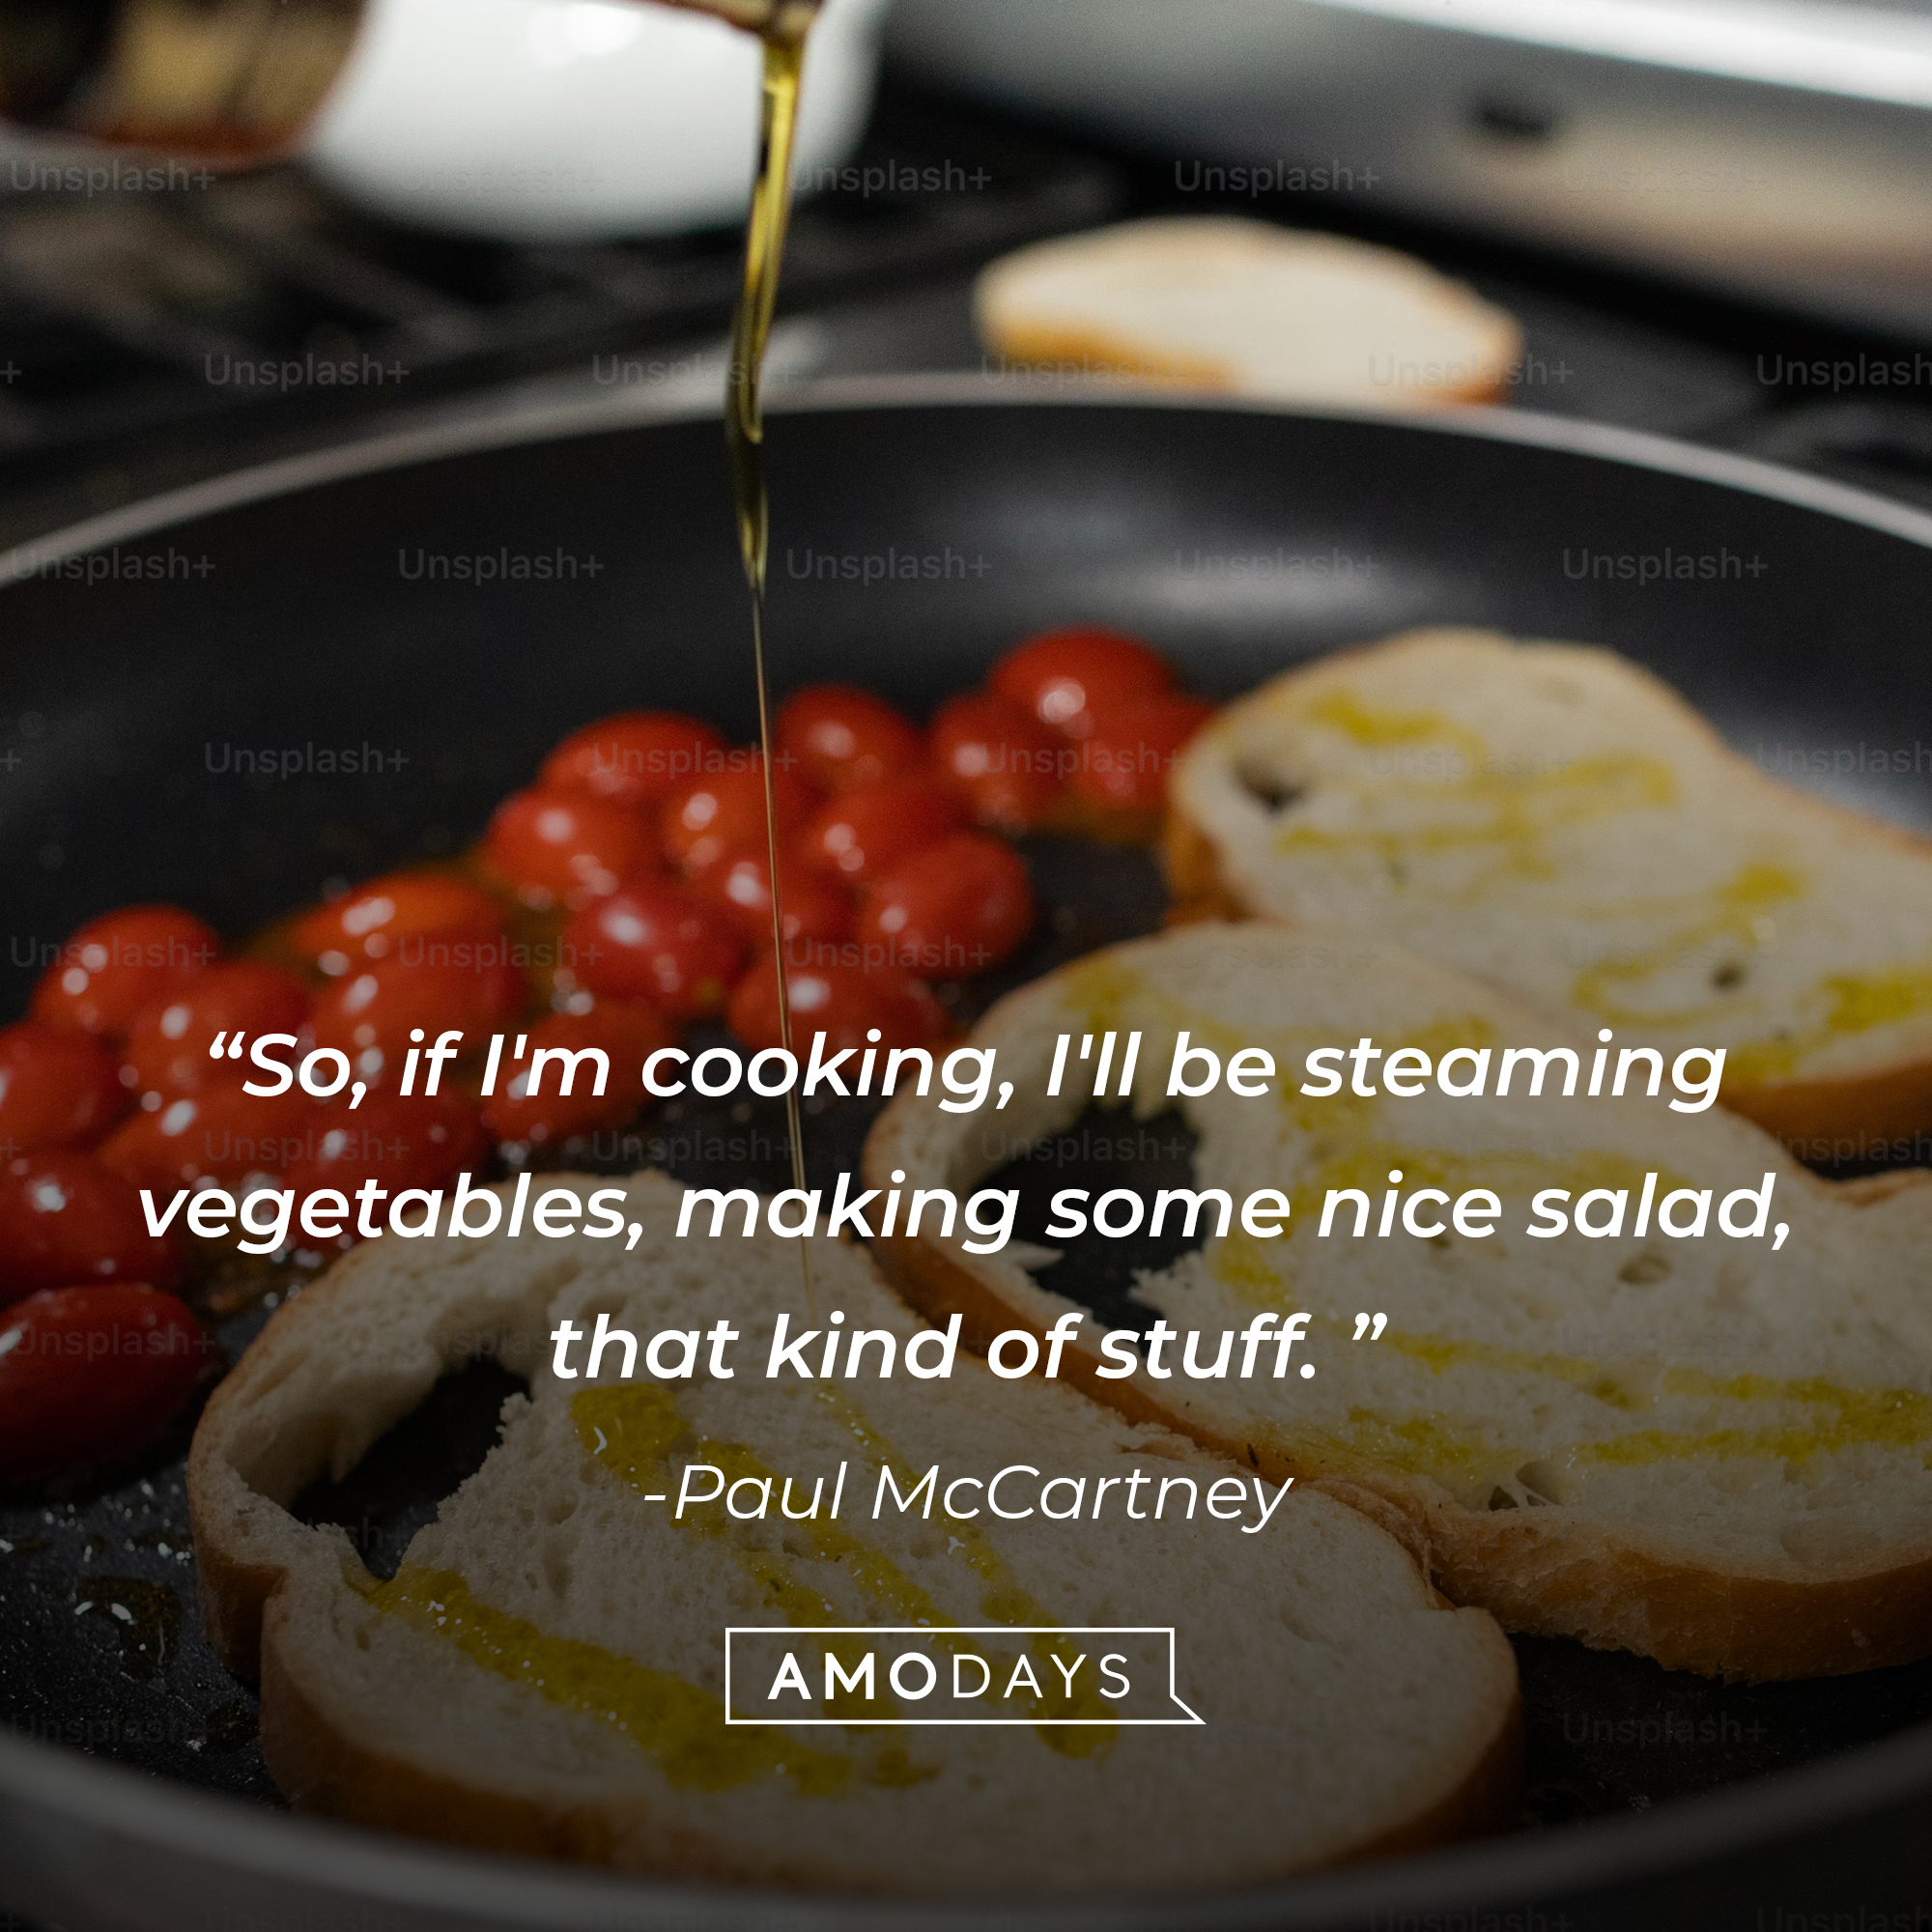 Paul McCartney's quote: "So, if I'm cooking, I'll be steaming vegetables, making some nice salad, that kind of stuff." Source: Brainyquote